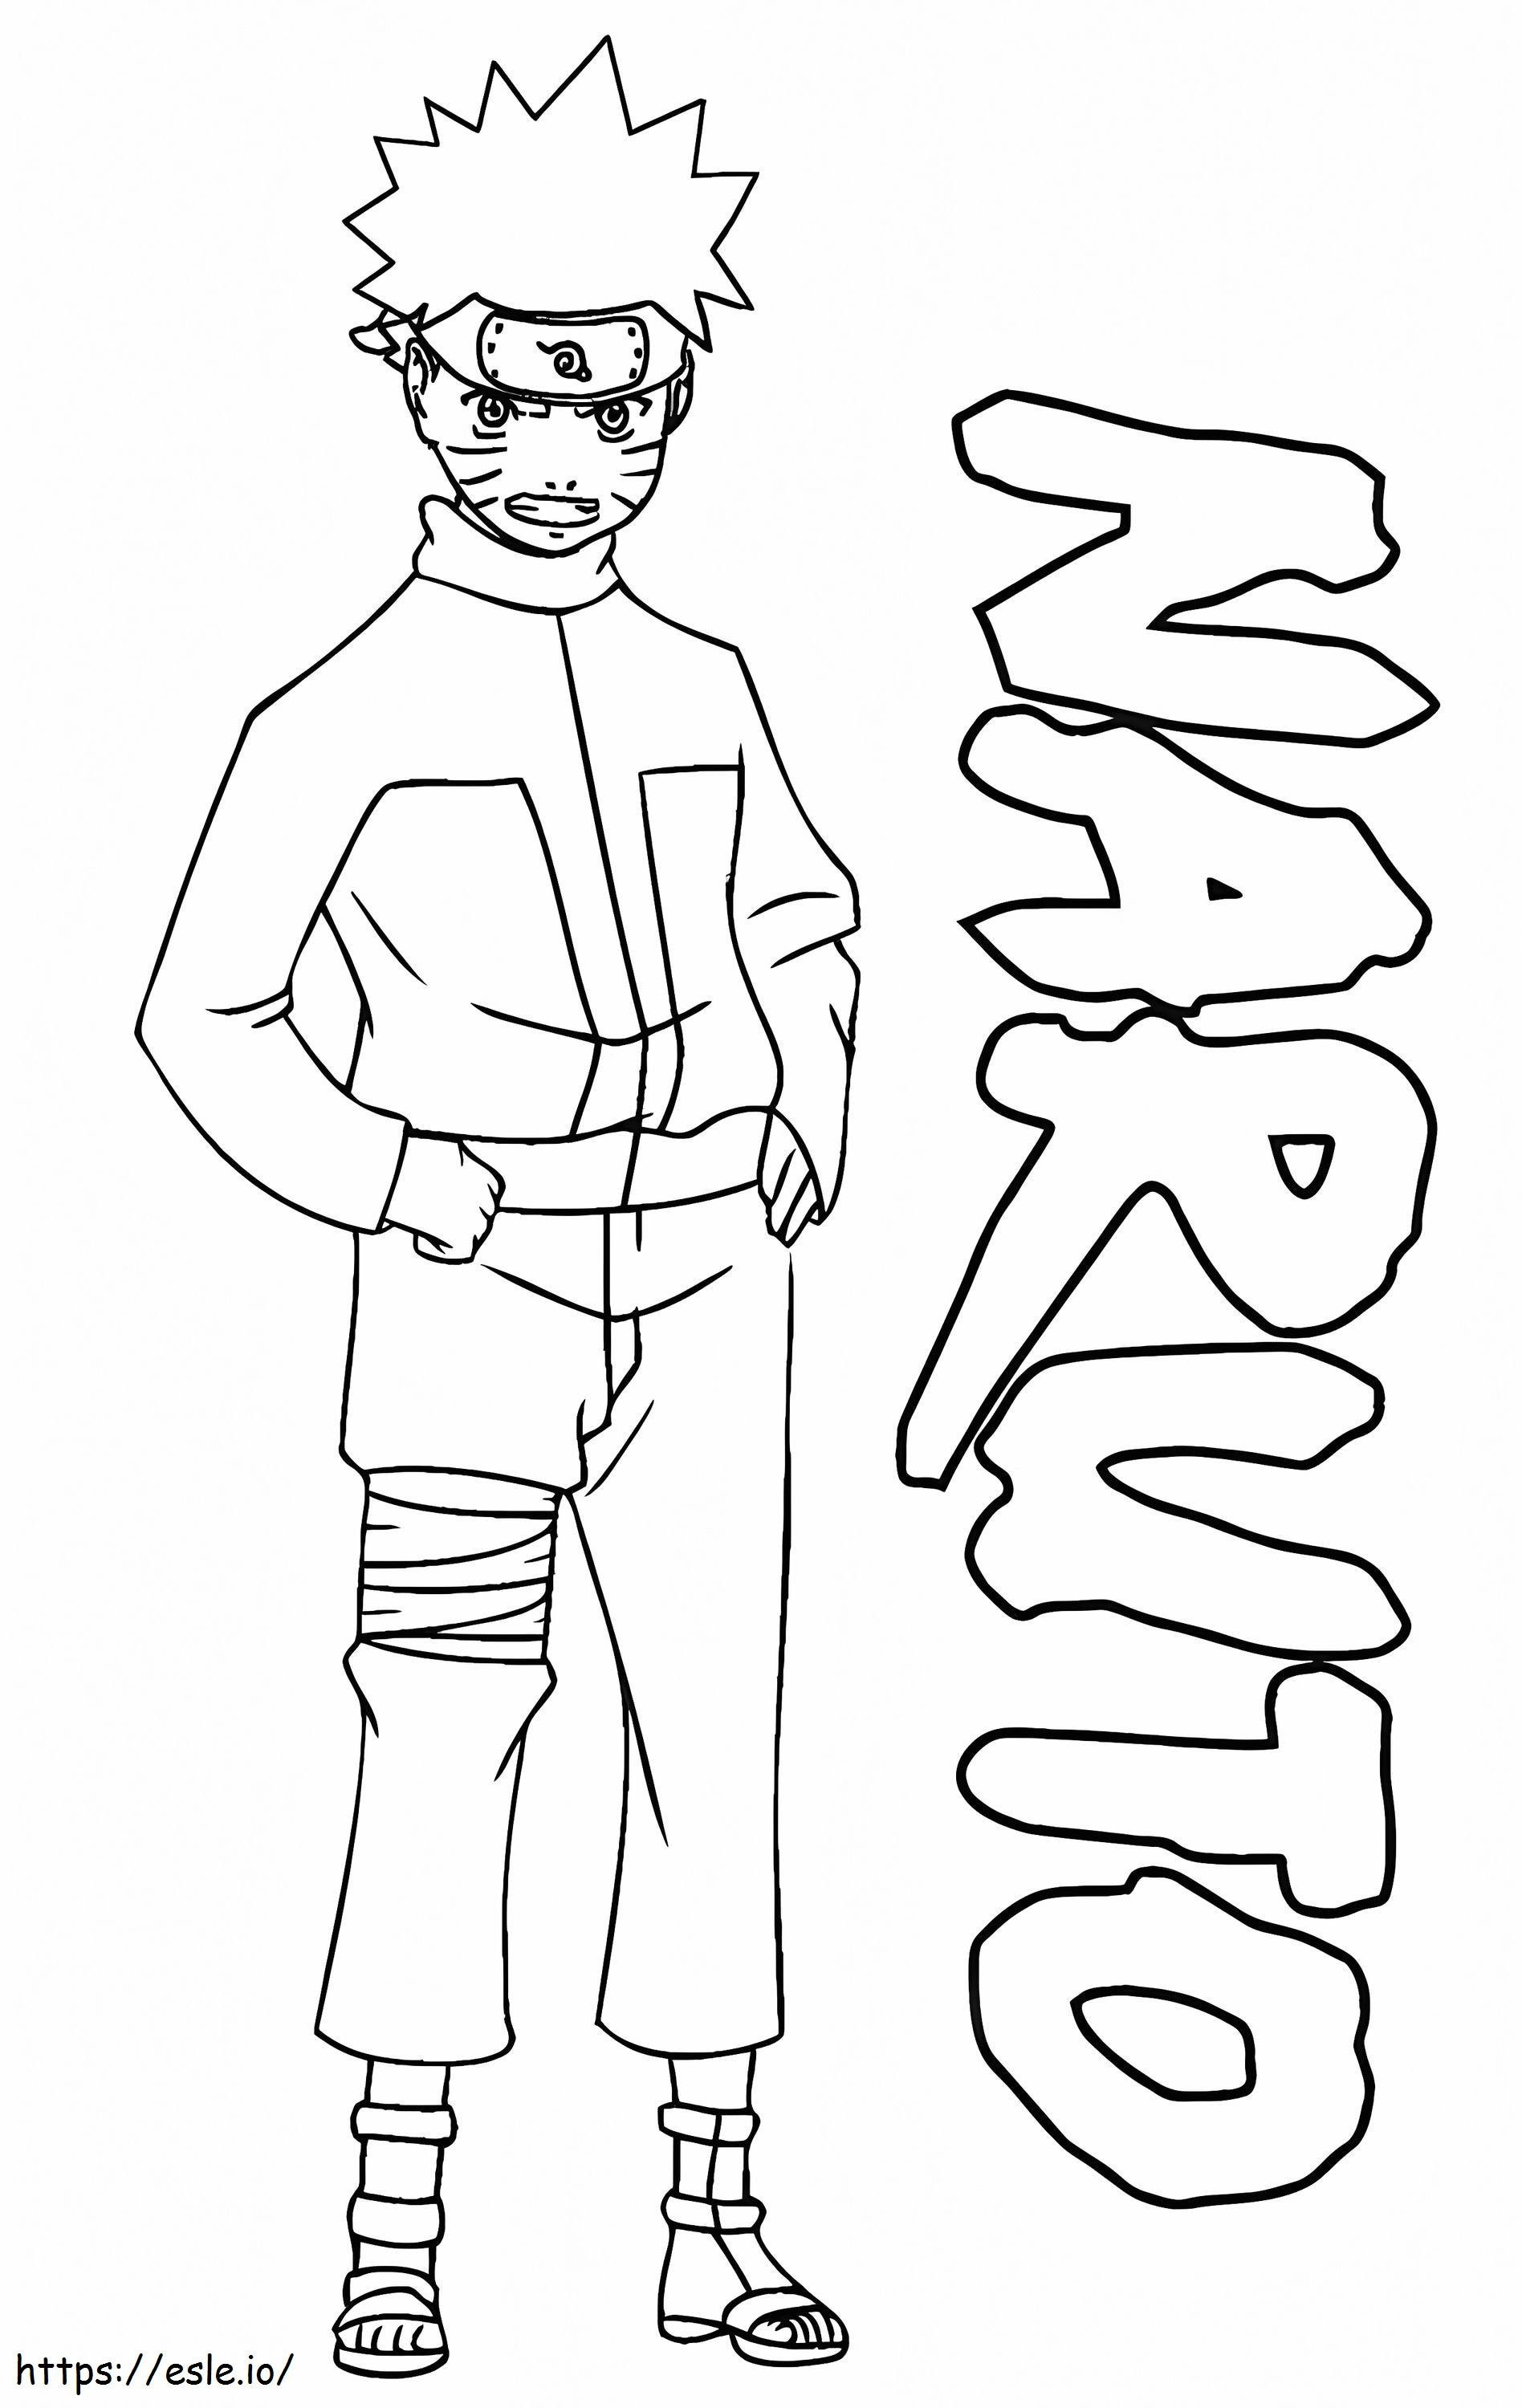 Coloring Pages Naruto Shippuden coloring page